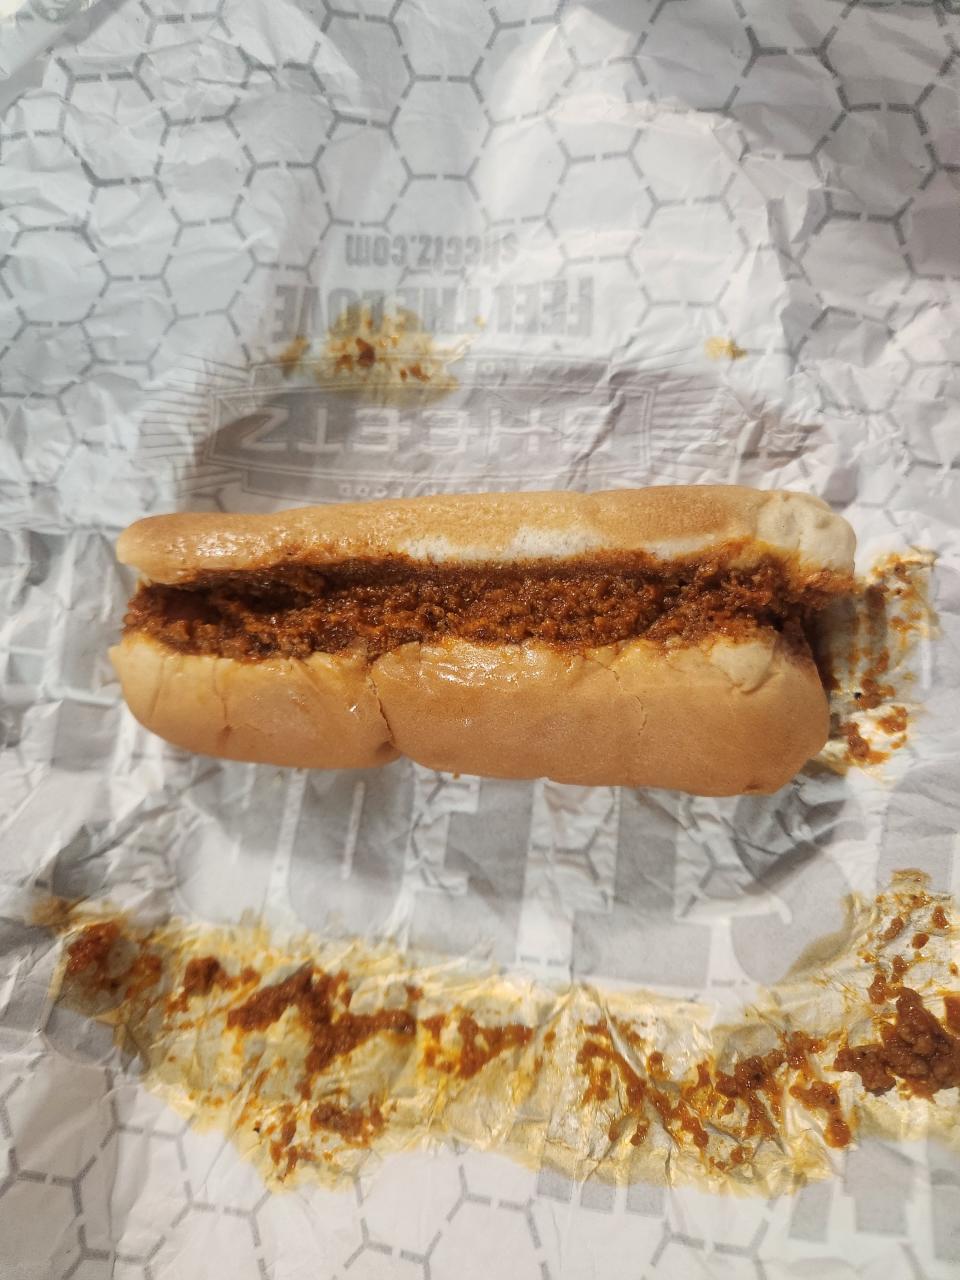 The Sheetz Chili Dogz have been a staple at the chain for decades.